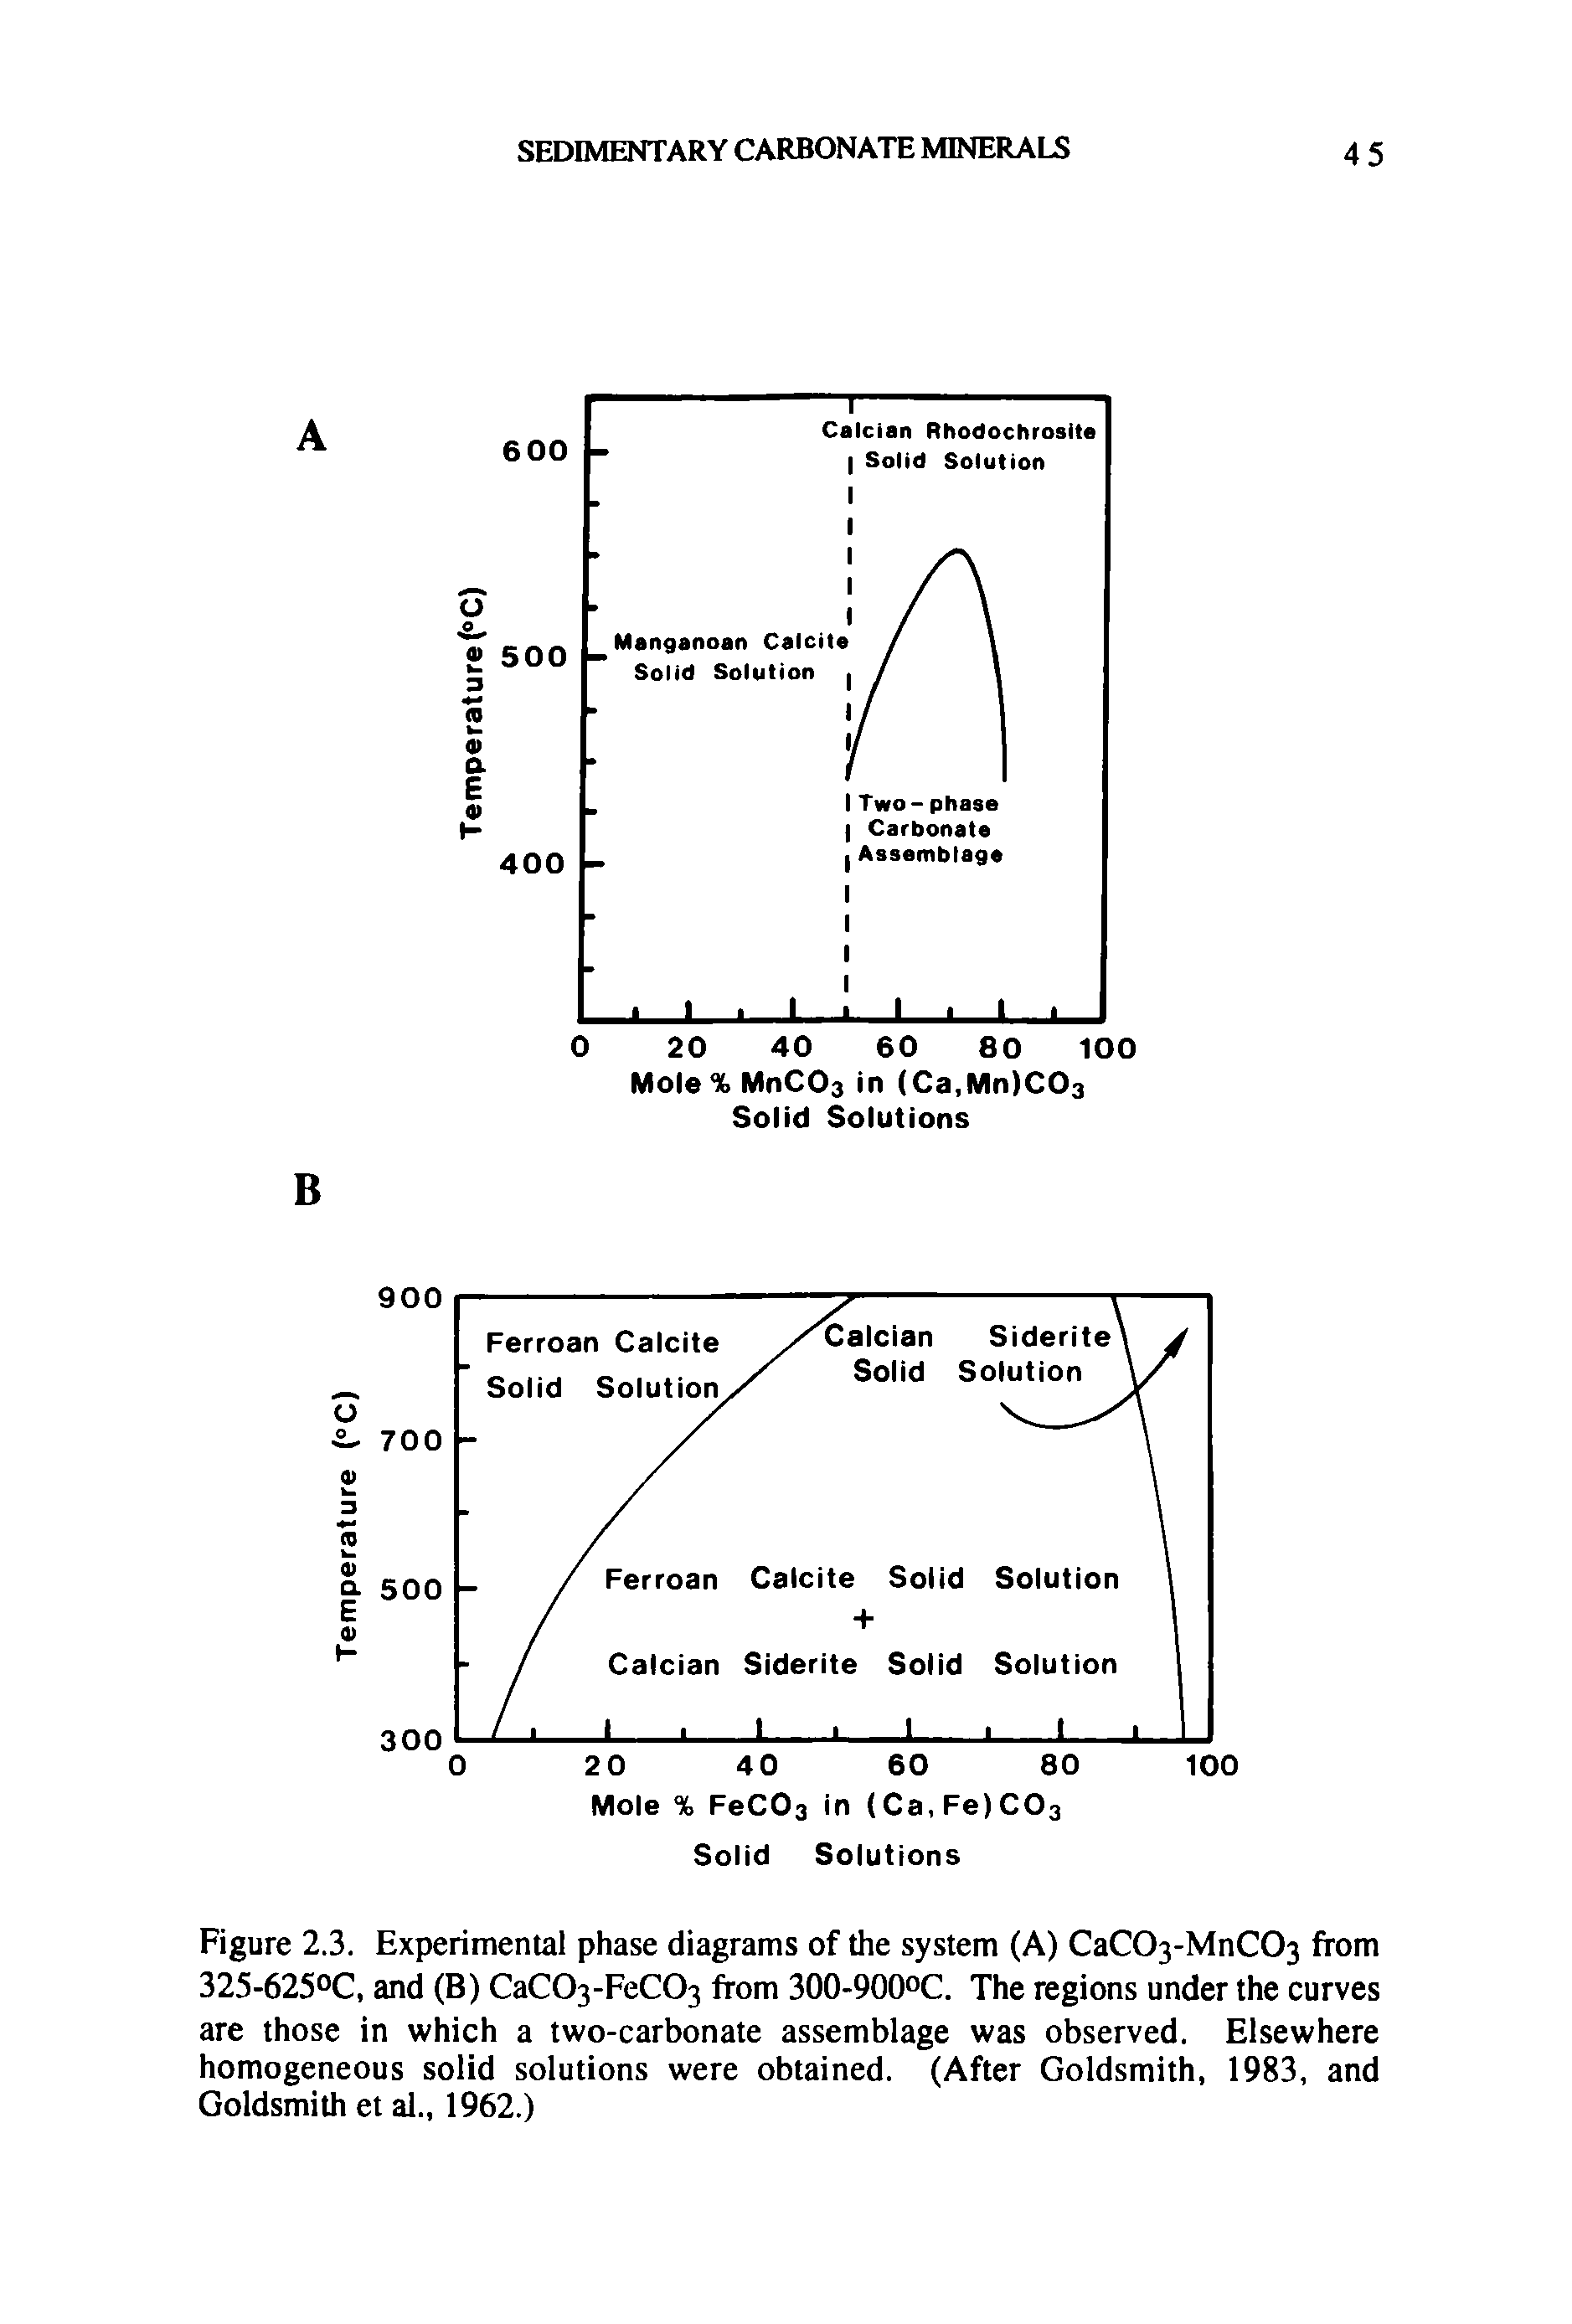 Figure 2.3. Experimental phase diagrams of the system (A) CaC03-MnC03 from 325-625°C, and (B) CaC03-FeC03 from 300-900°C. The regions under the curves are those in which a two-carbonate assemblage was observed. Elsewhere homogeneous solid solutions were obtained. (After Goldsmith, 1983, and Goldsmith et al., 1962.)...